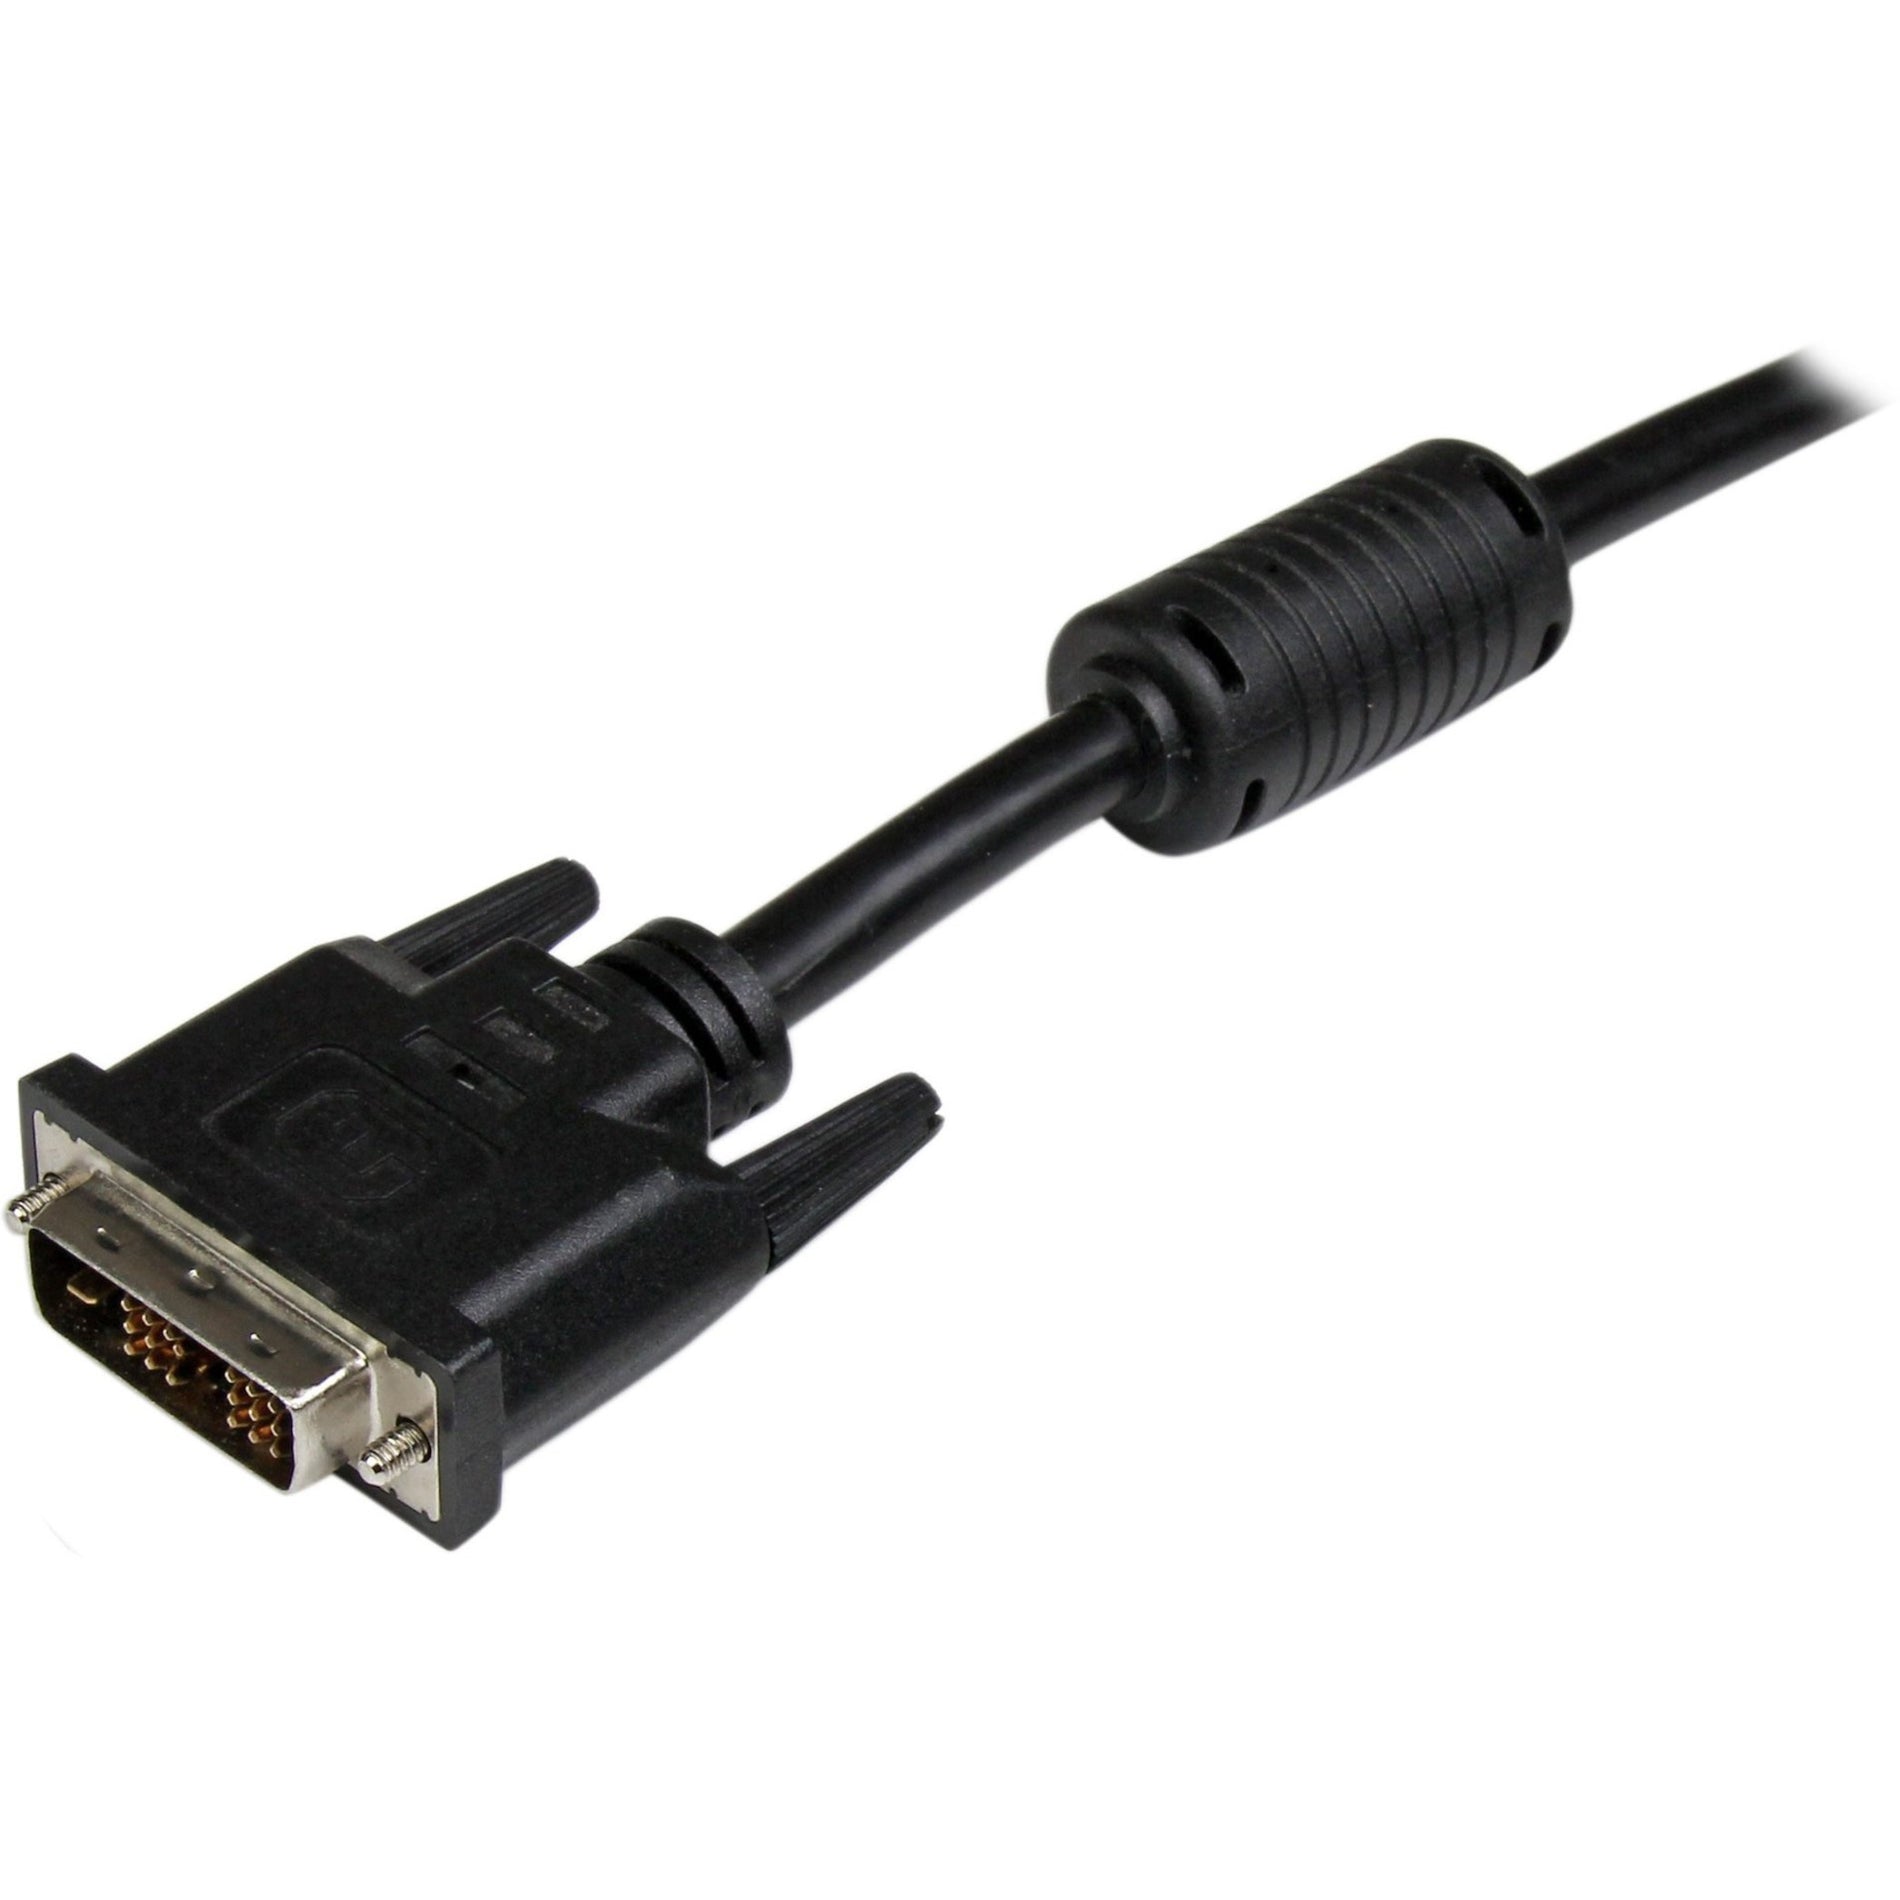 StarTech.com DVIDSMM25 DVI-D Single Link Cable - M/M, 25 ft Video Cable, 1920 x 1200 Supported Resolution